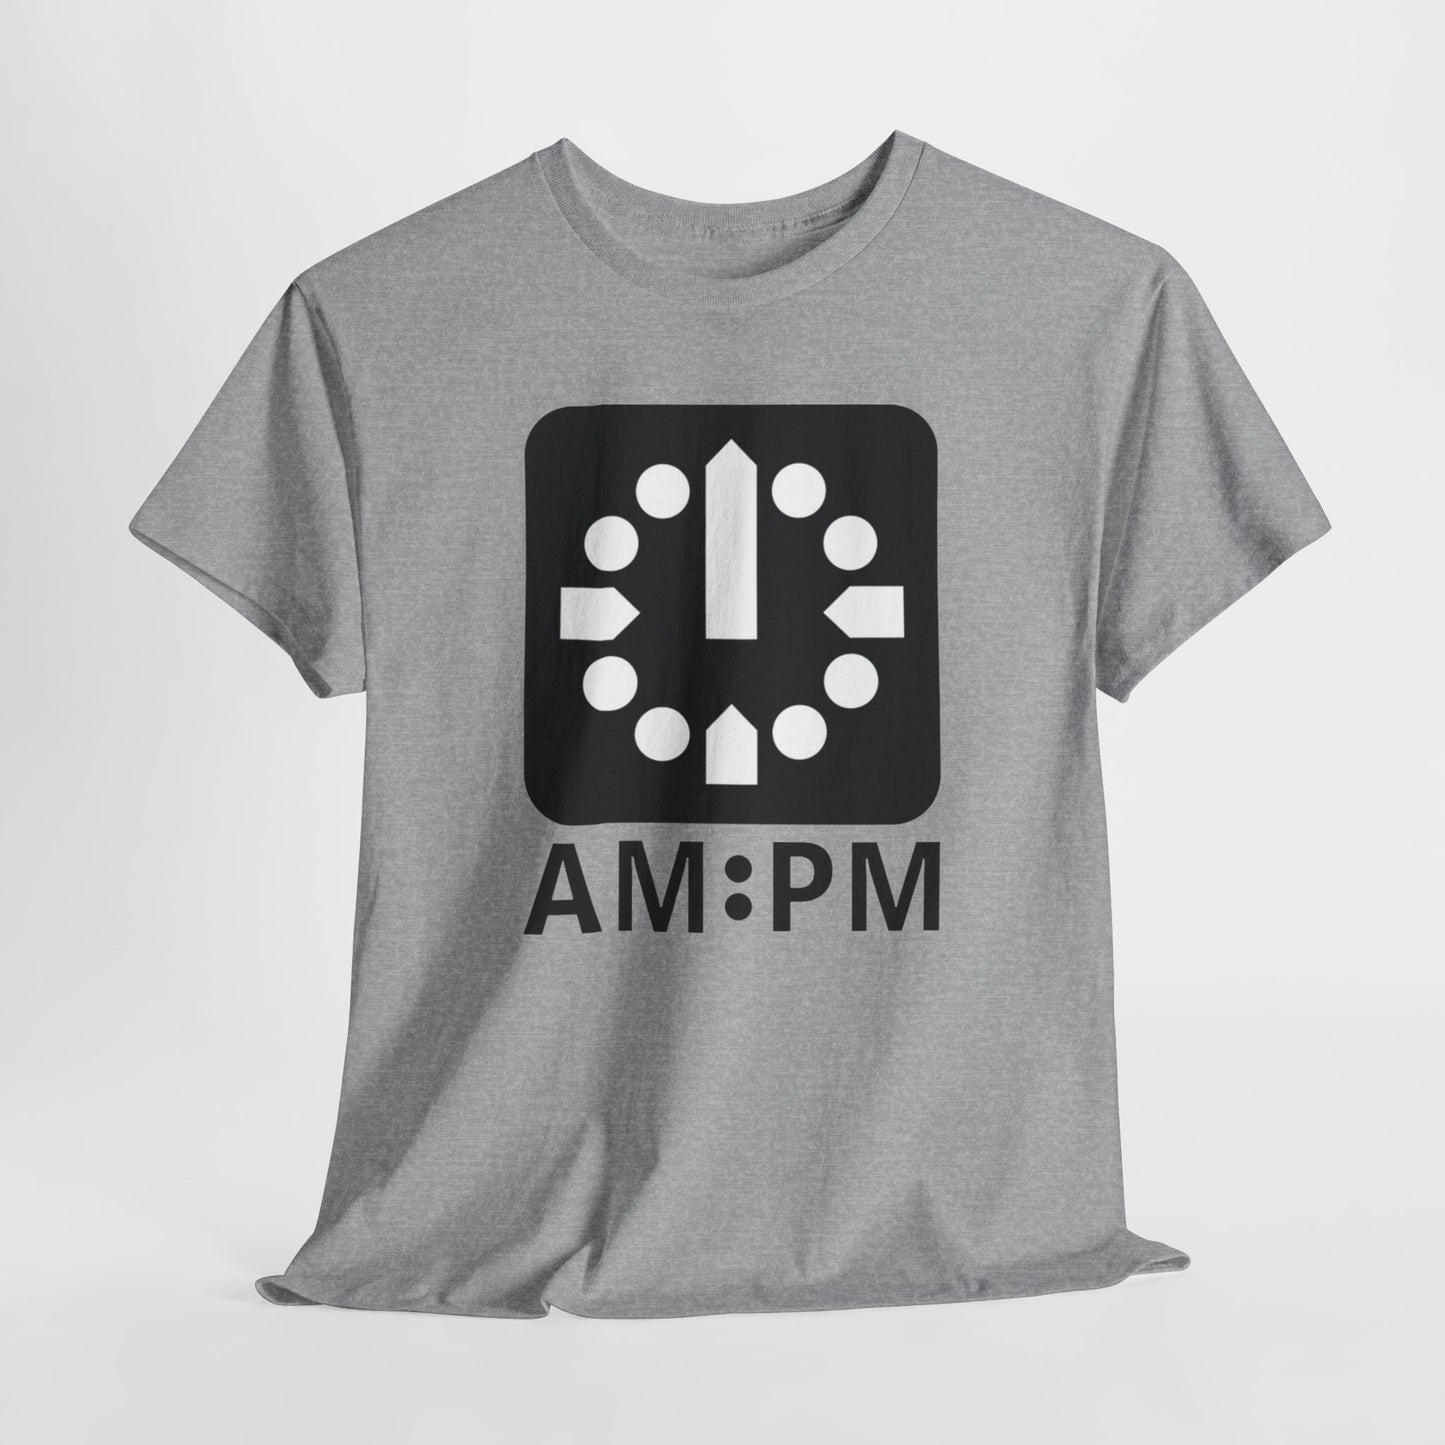 Music Label Tee #205: AM PM Records